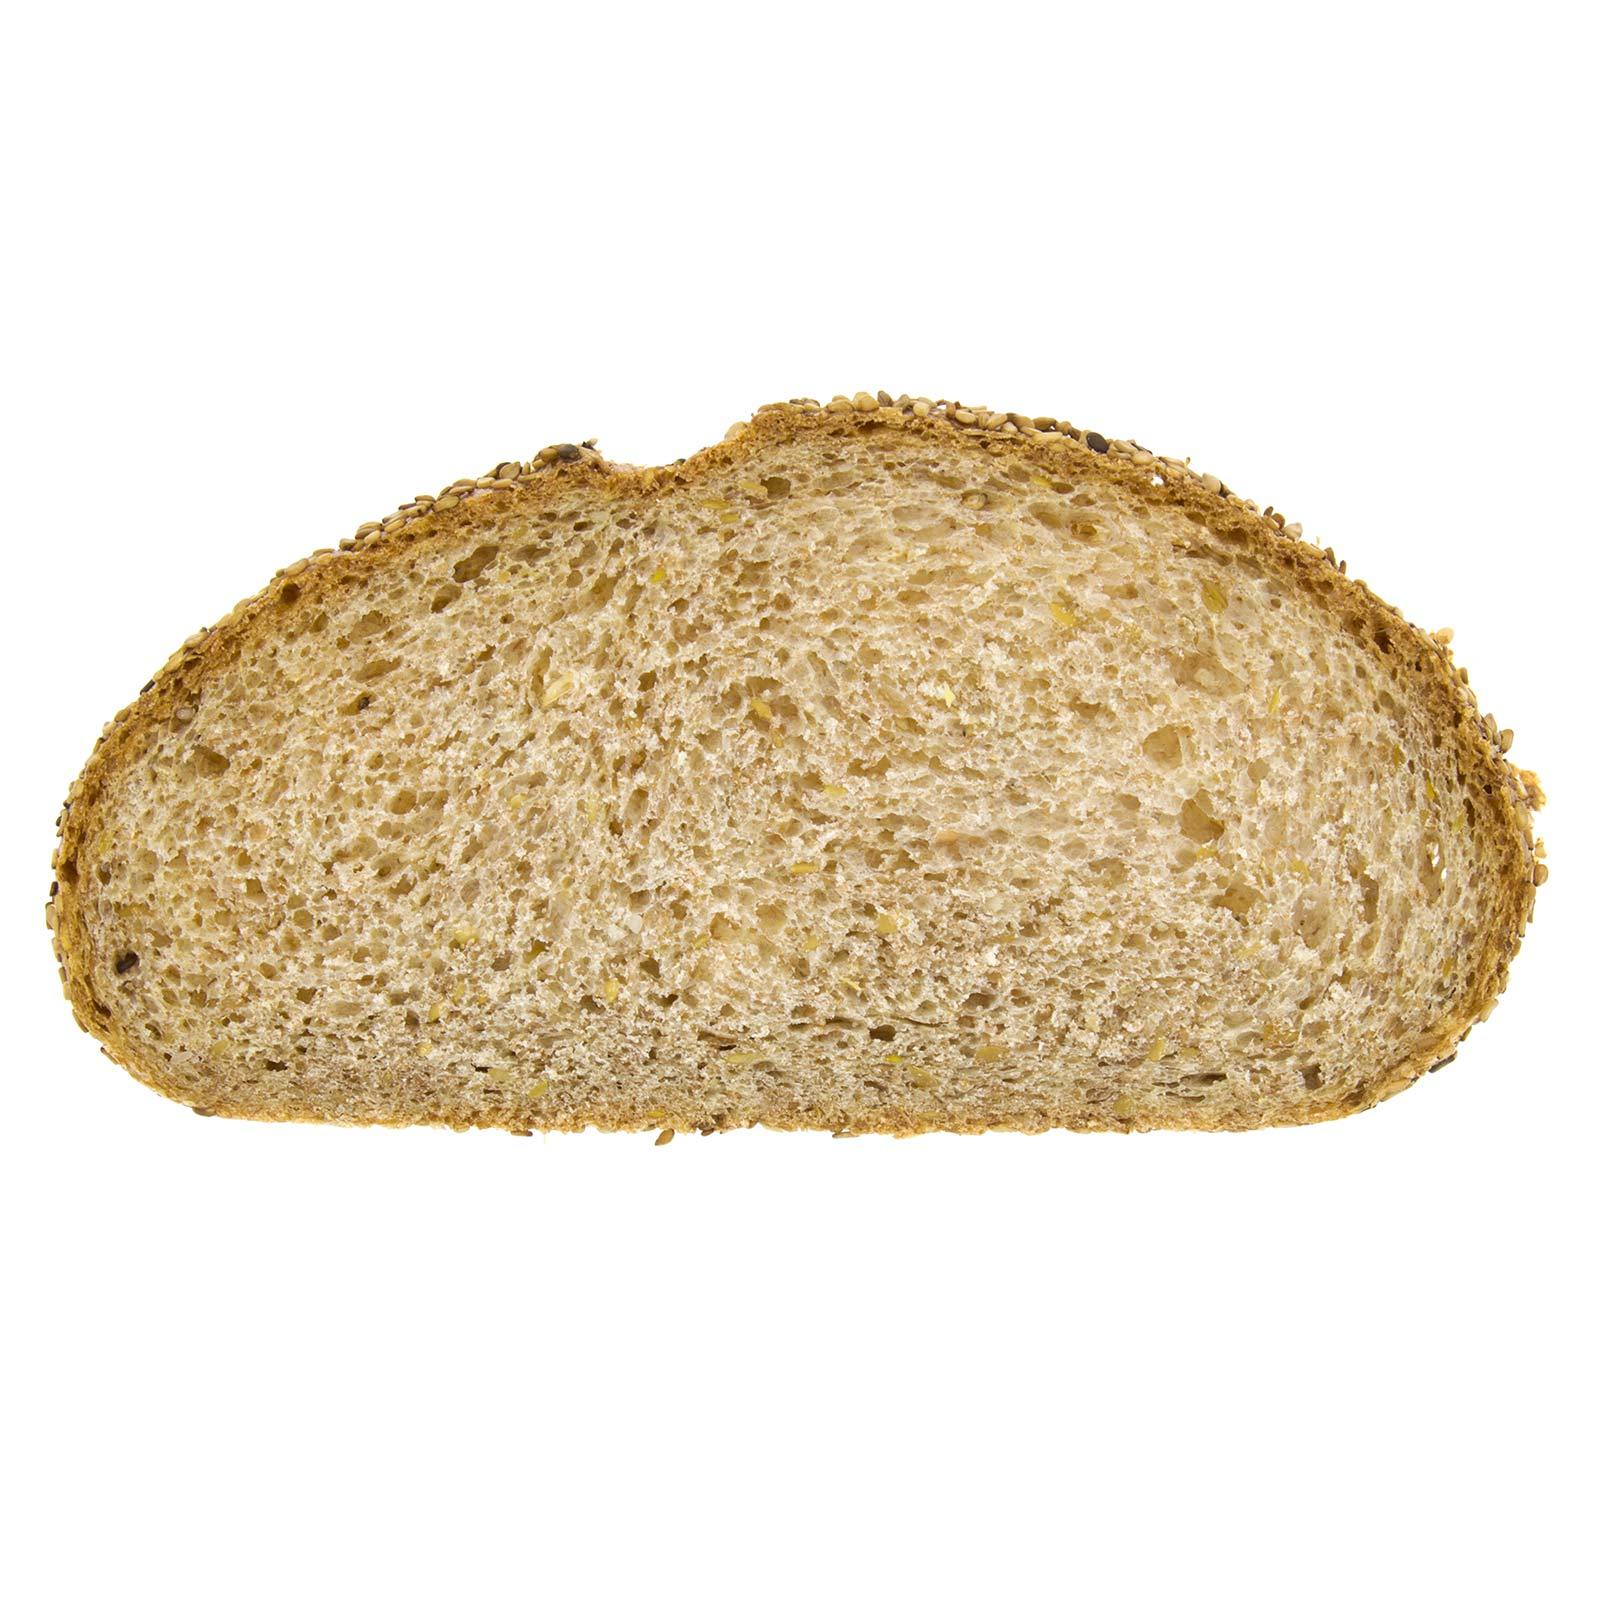 Round bread of whole wheat with sesame 450g ecological (uncut)